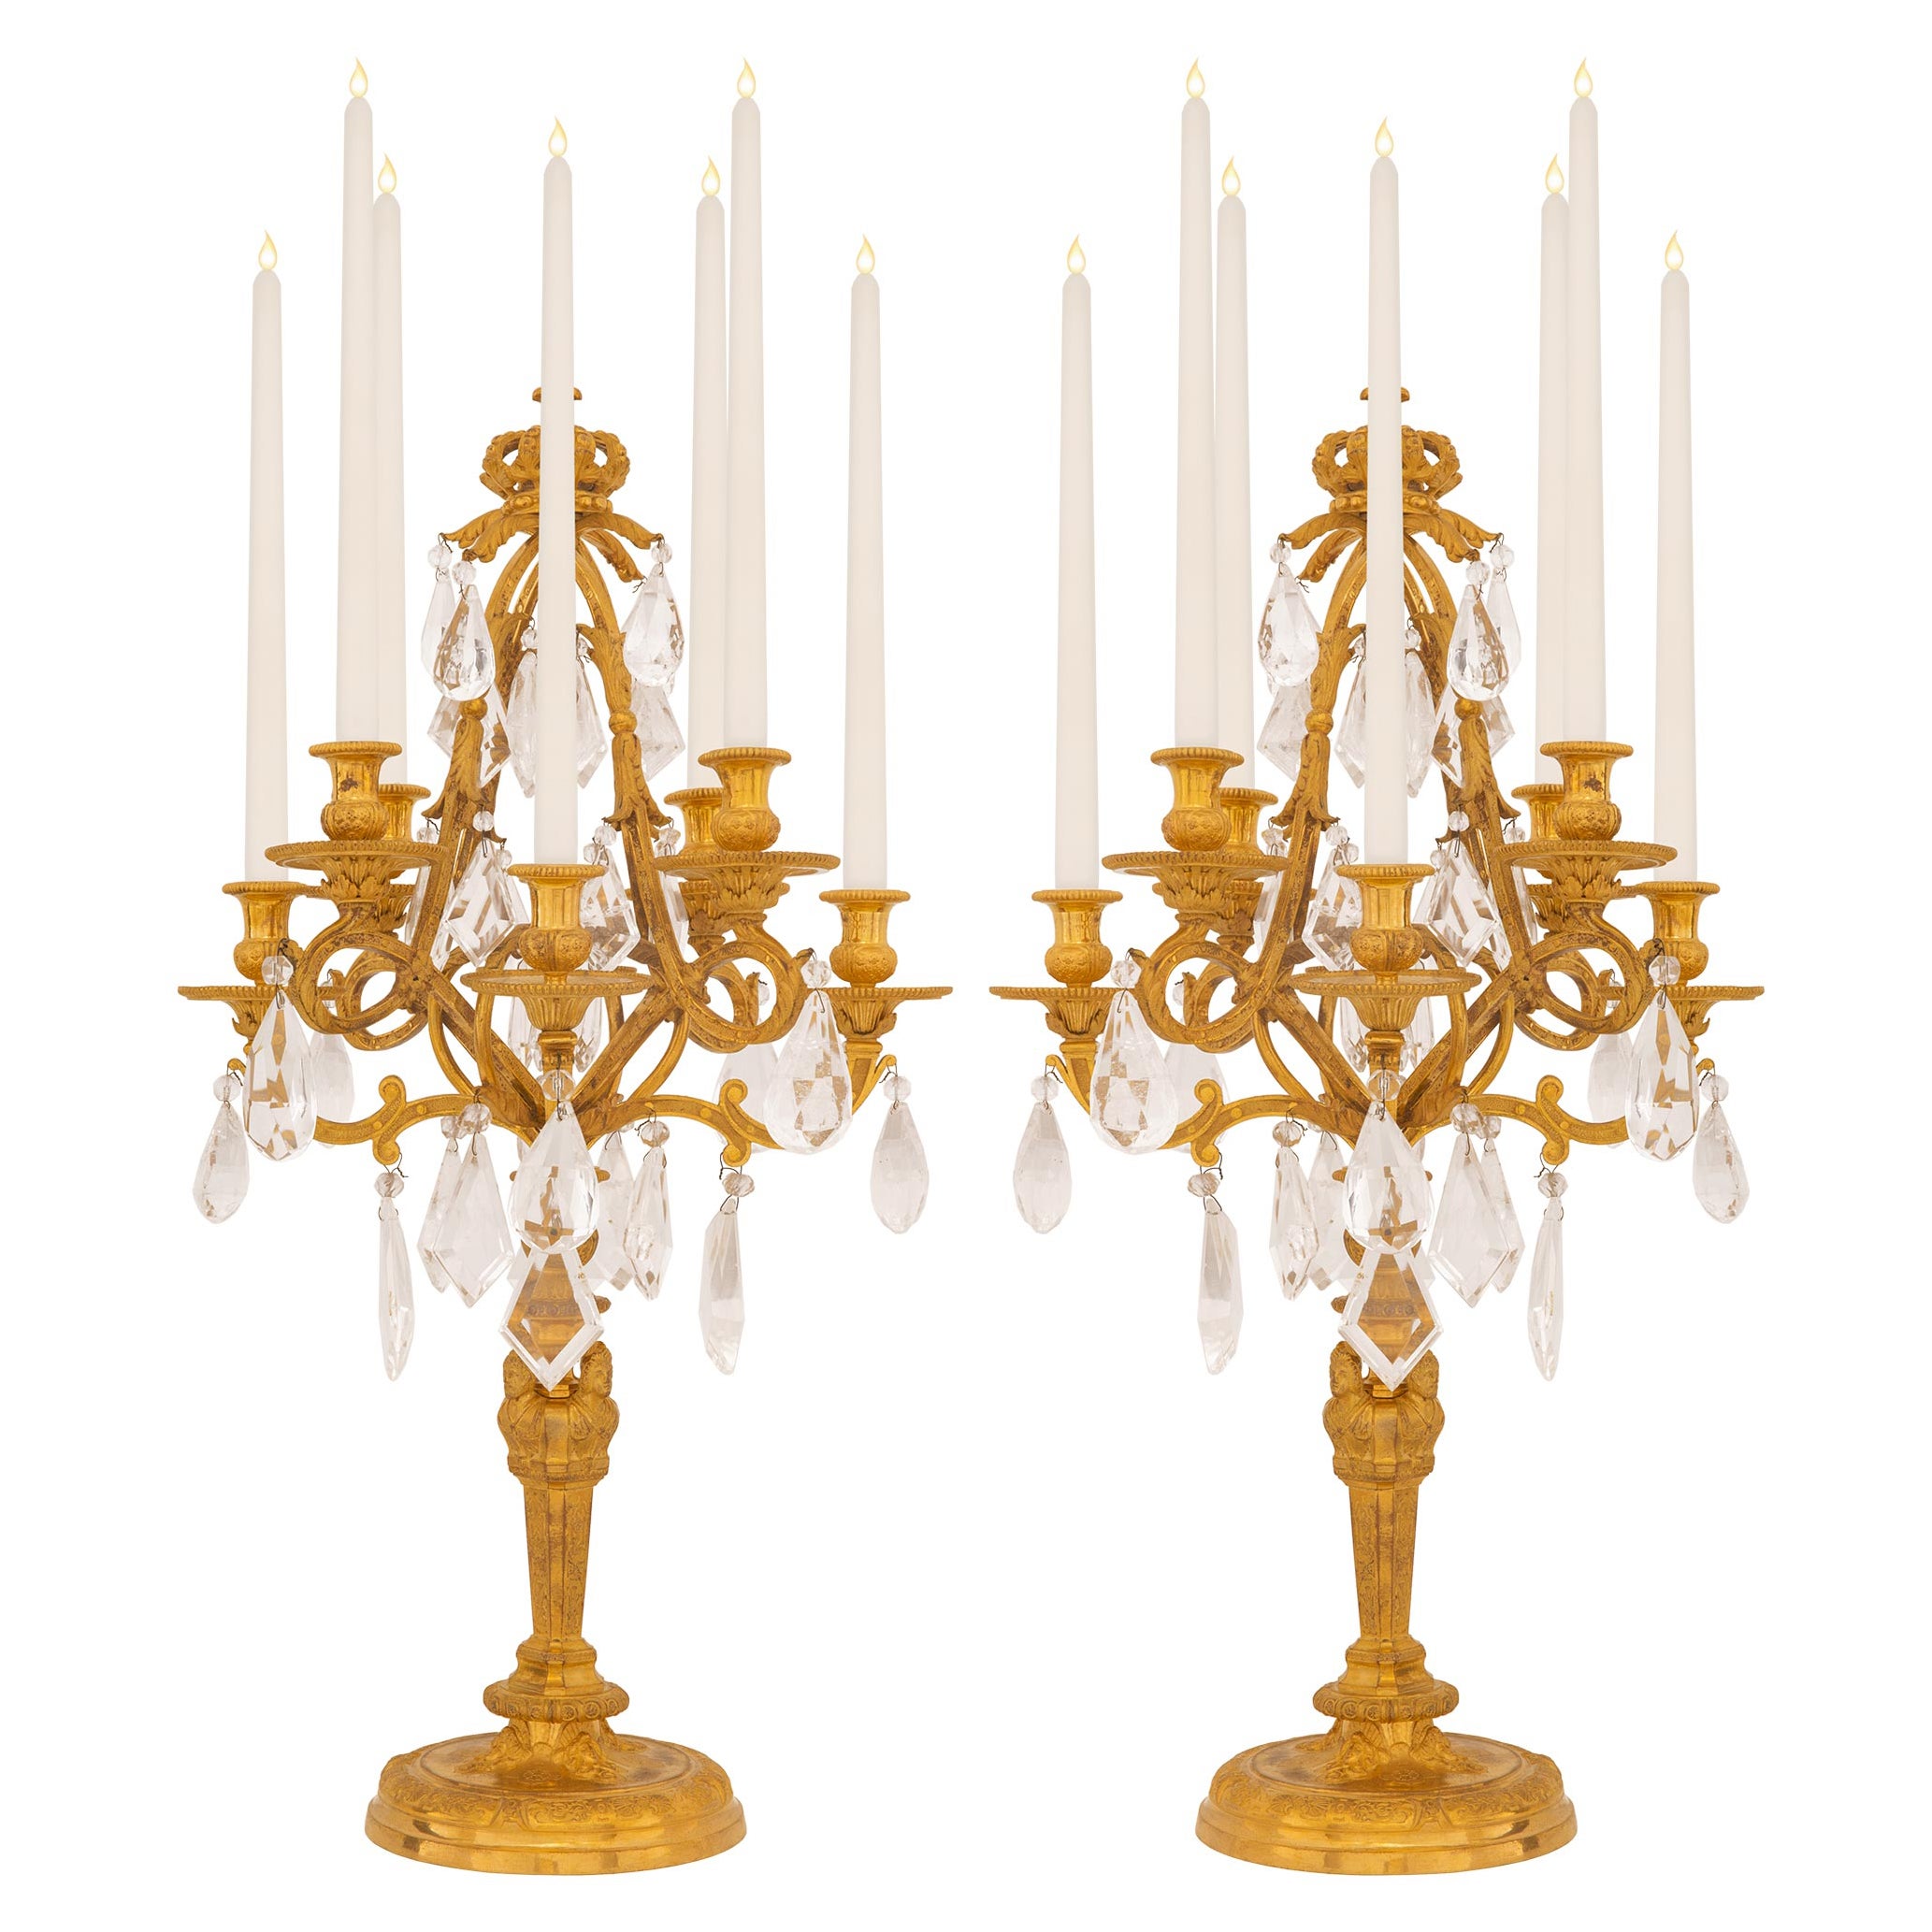 Pair Of French 17th Century Louis XIV Period Ormolu And Rock Crystal Candelabras